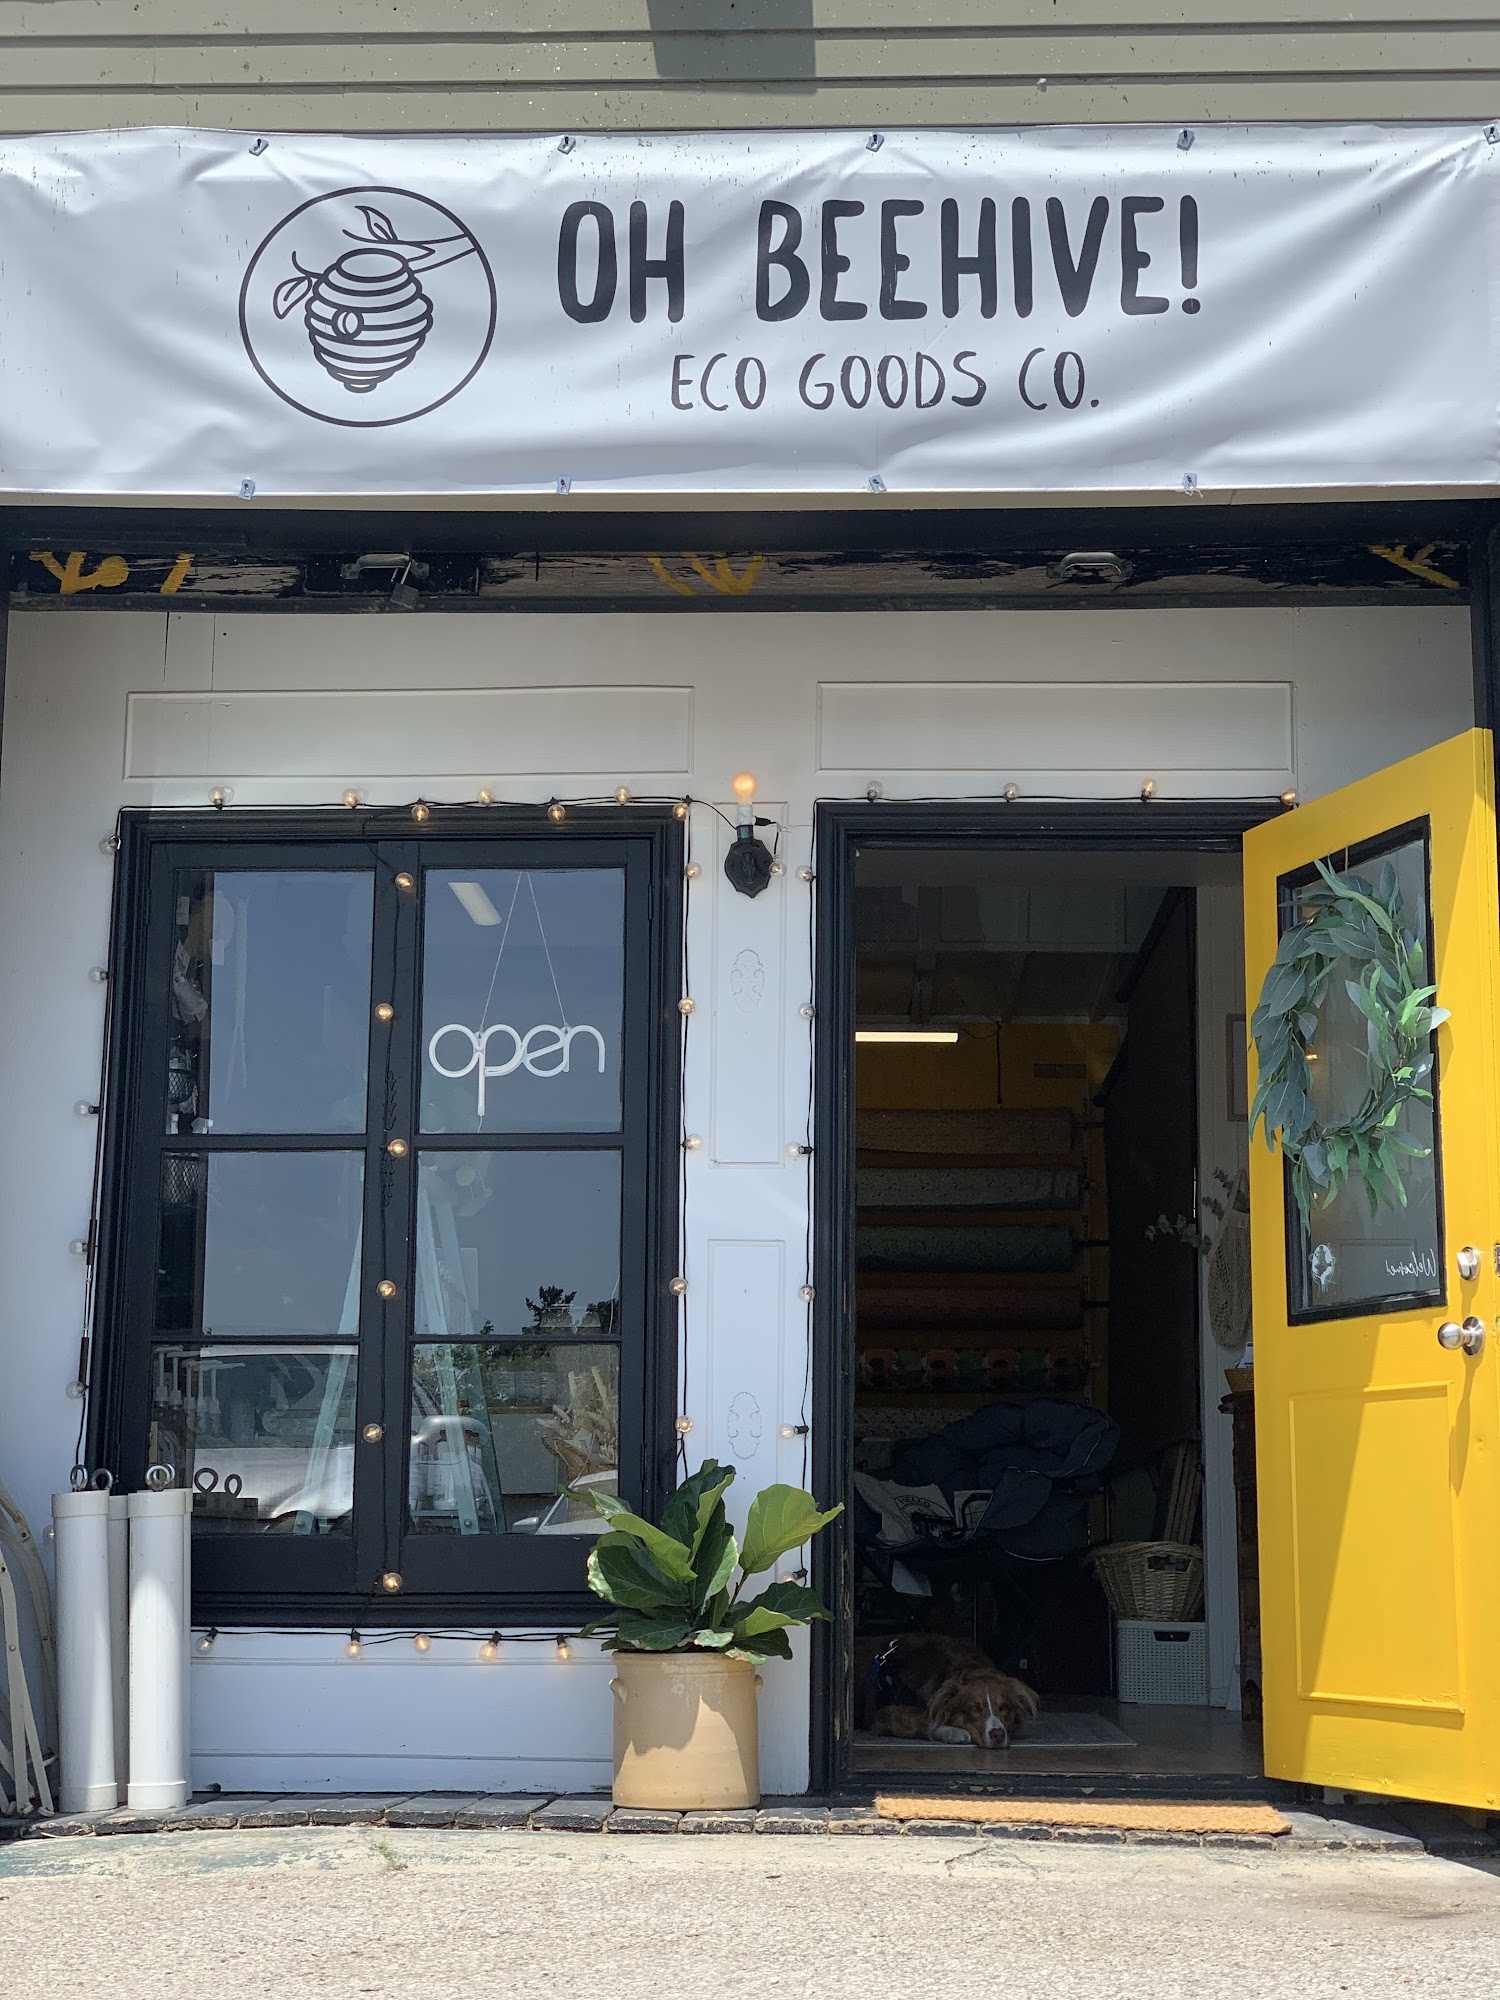 Oh Beehive! Eco Goods Co. and Refillery